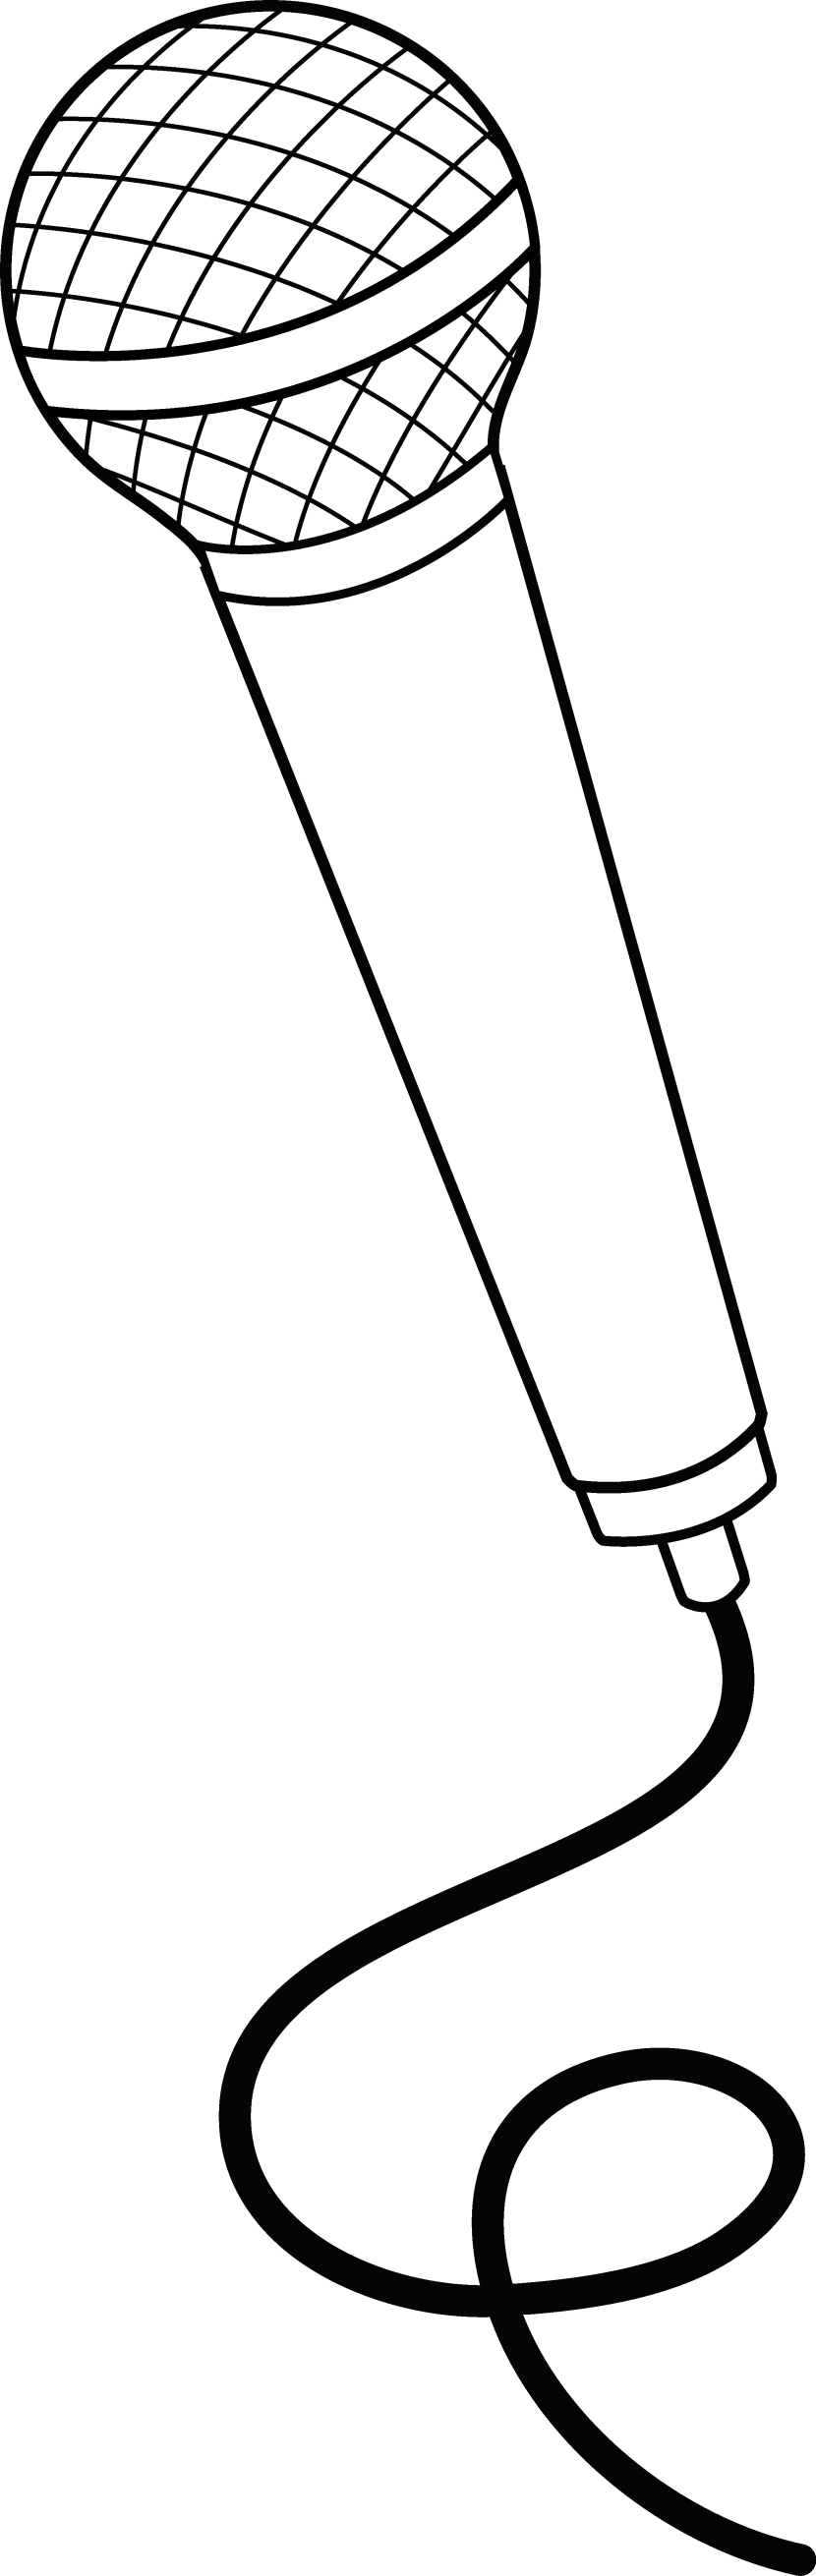 Pages eskayalitim . Microphone clipart coloring page